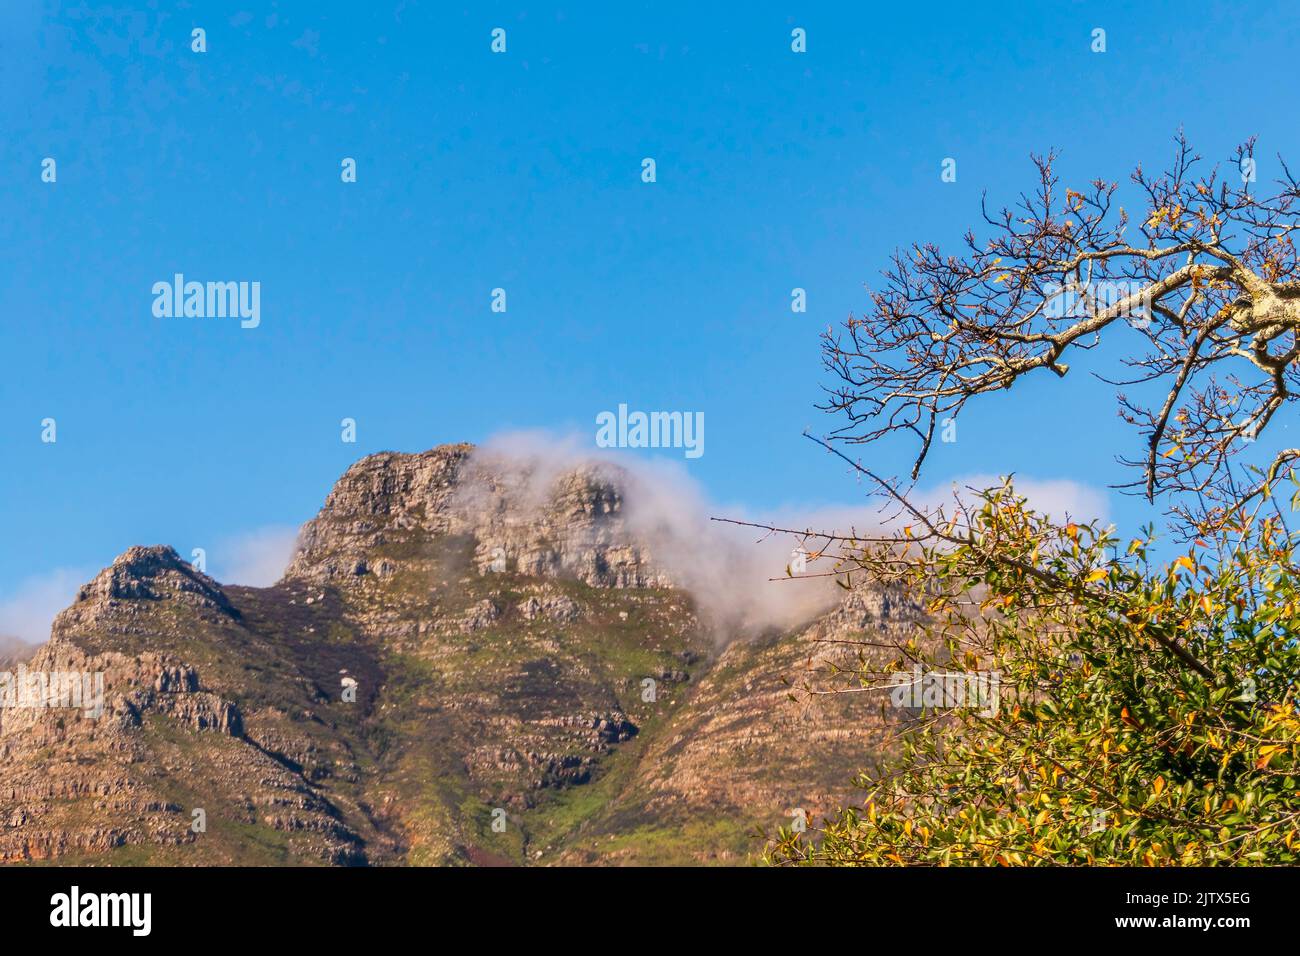 View of the table mountain in Cape Town through the trees. South Africa Stock Photo